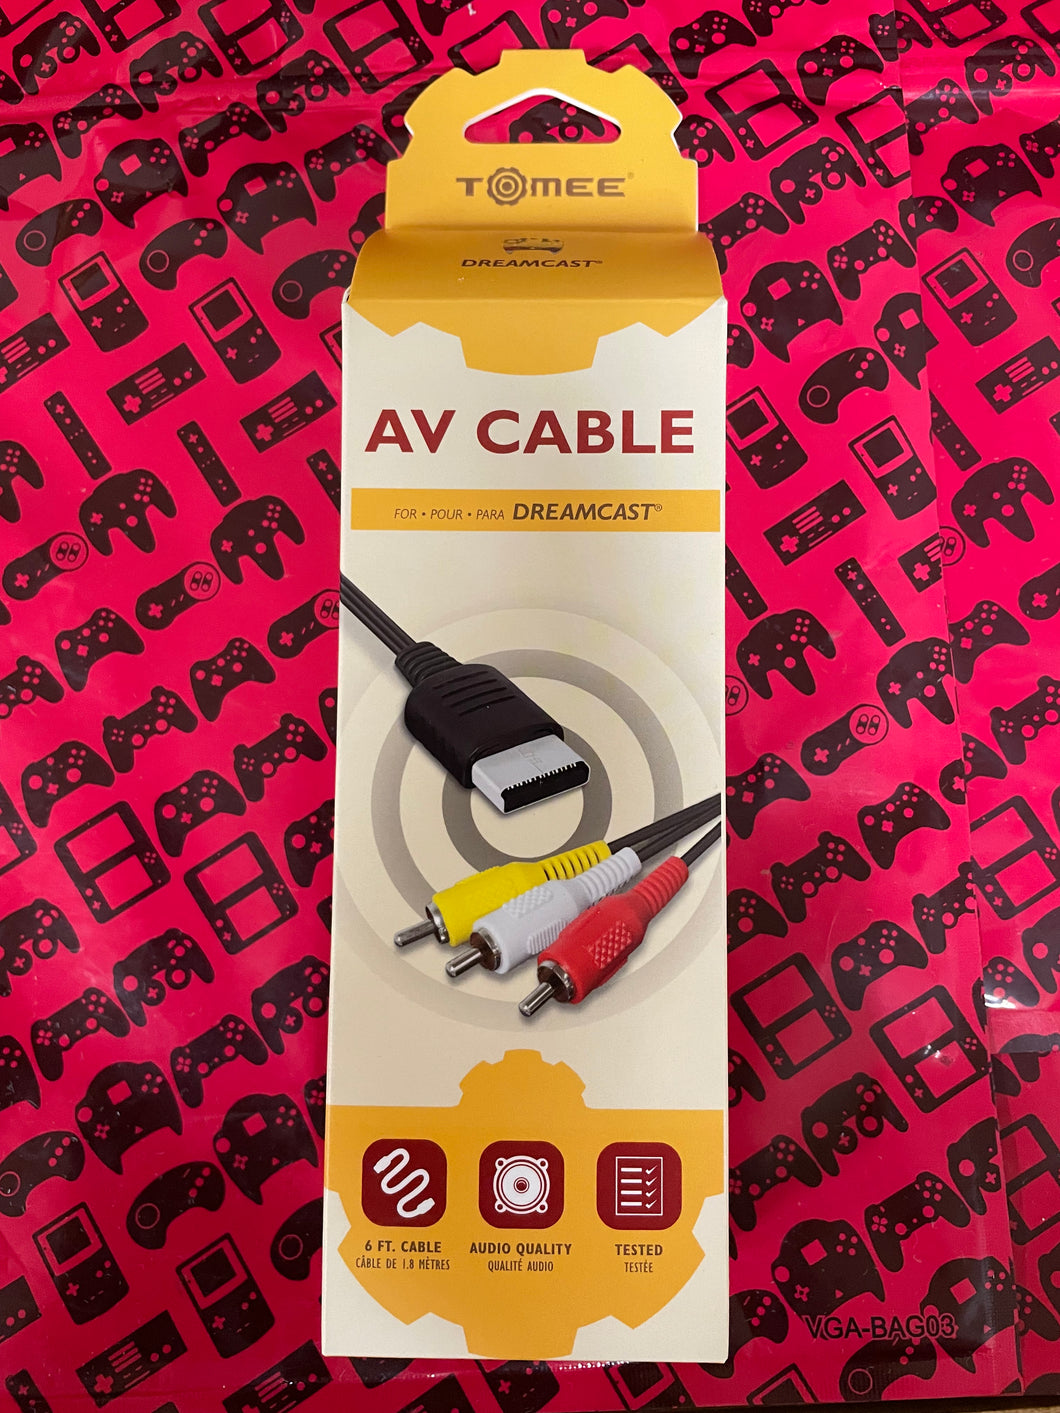 Tomee AV Cable For Dreamcast